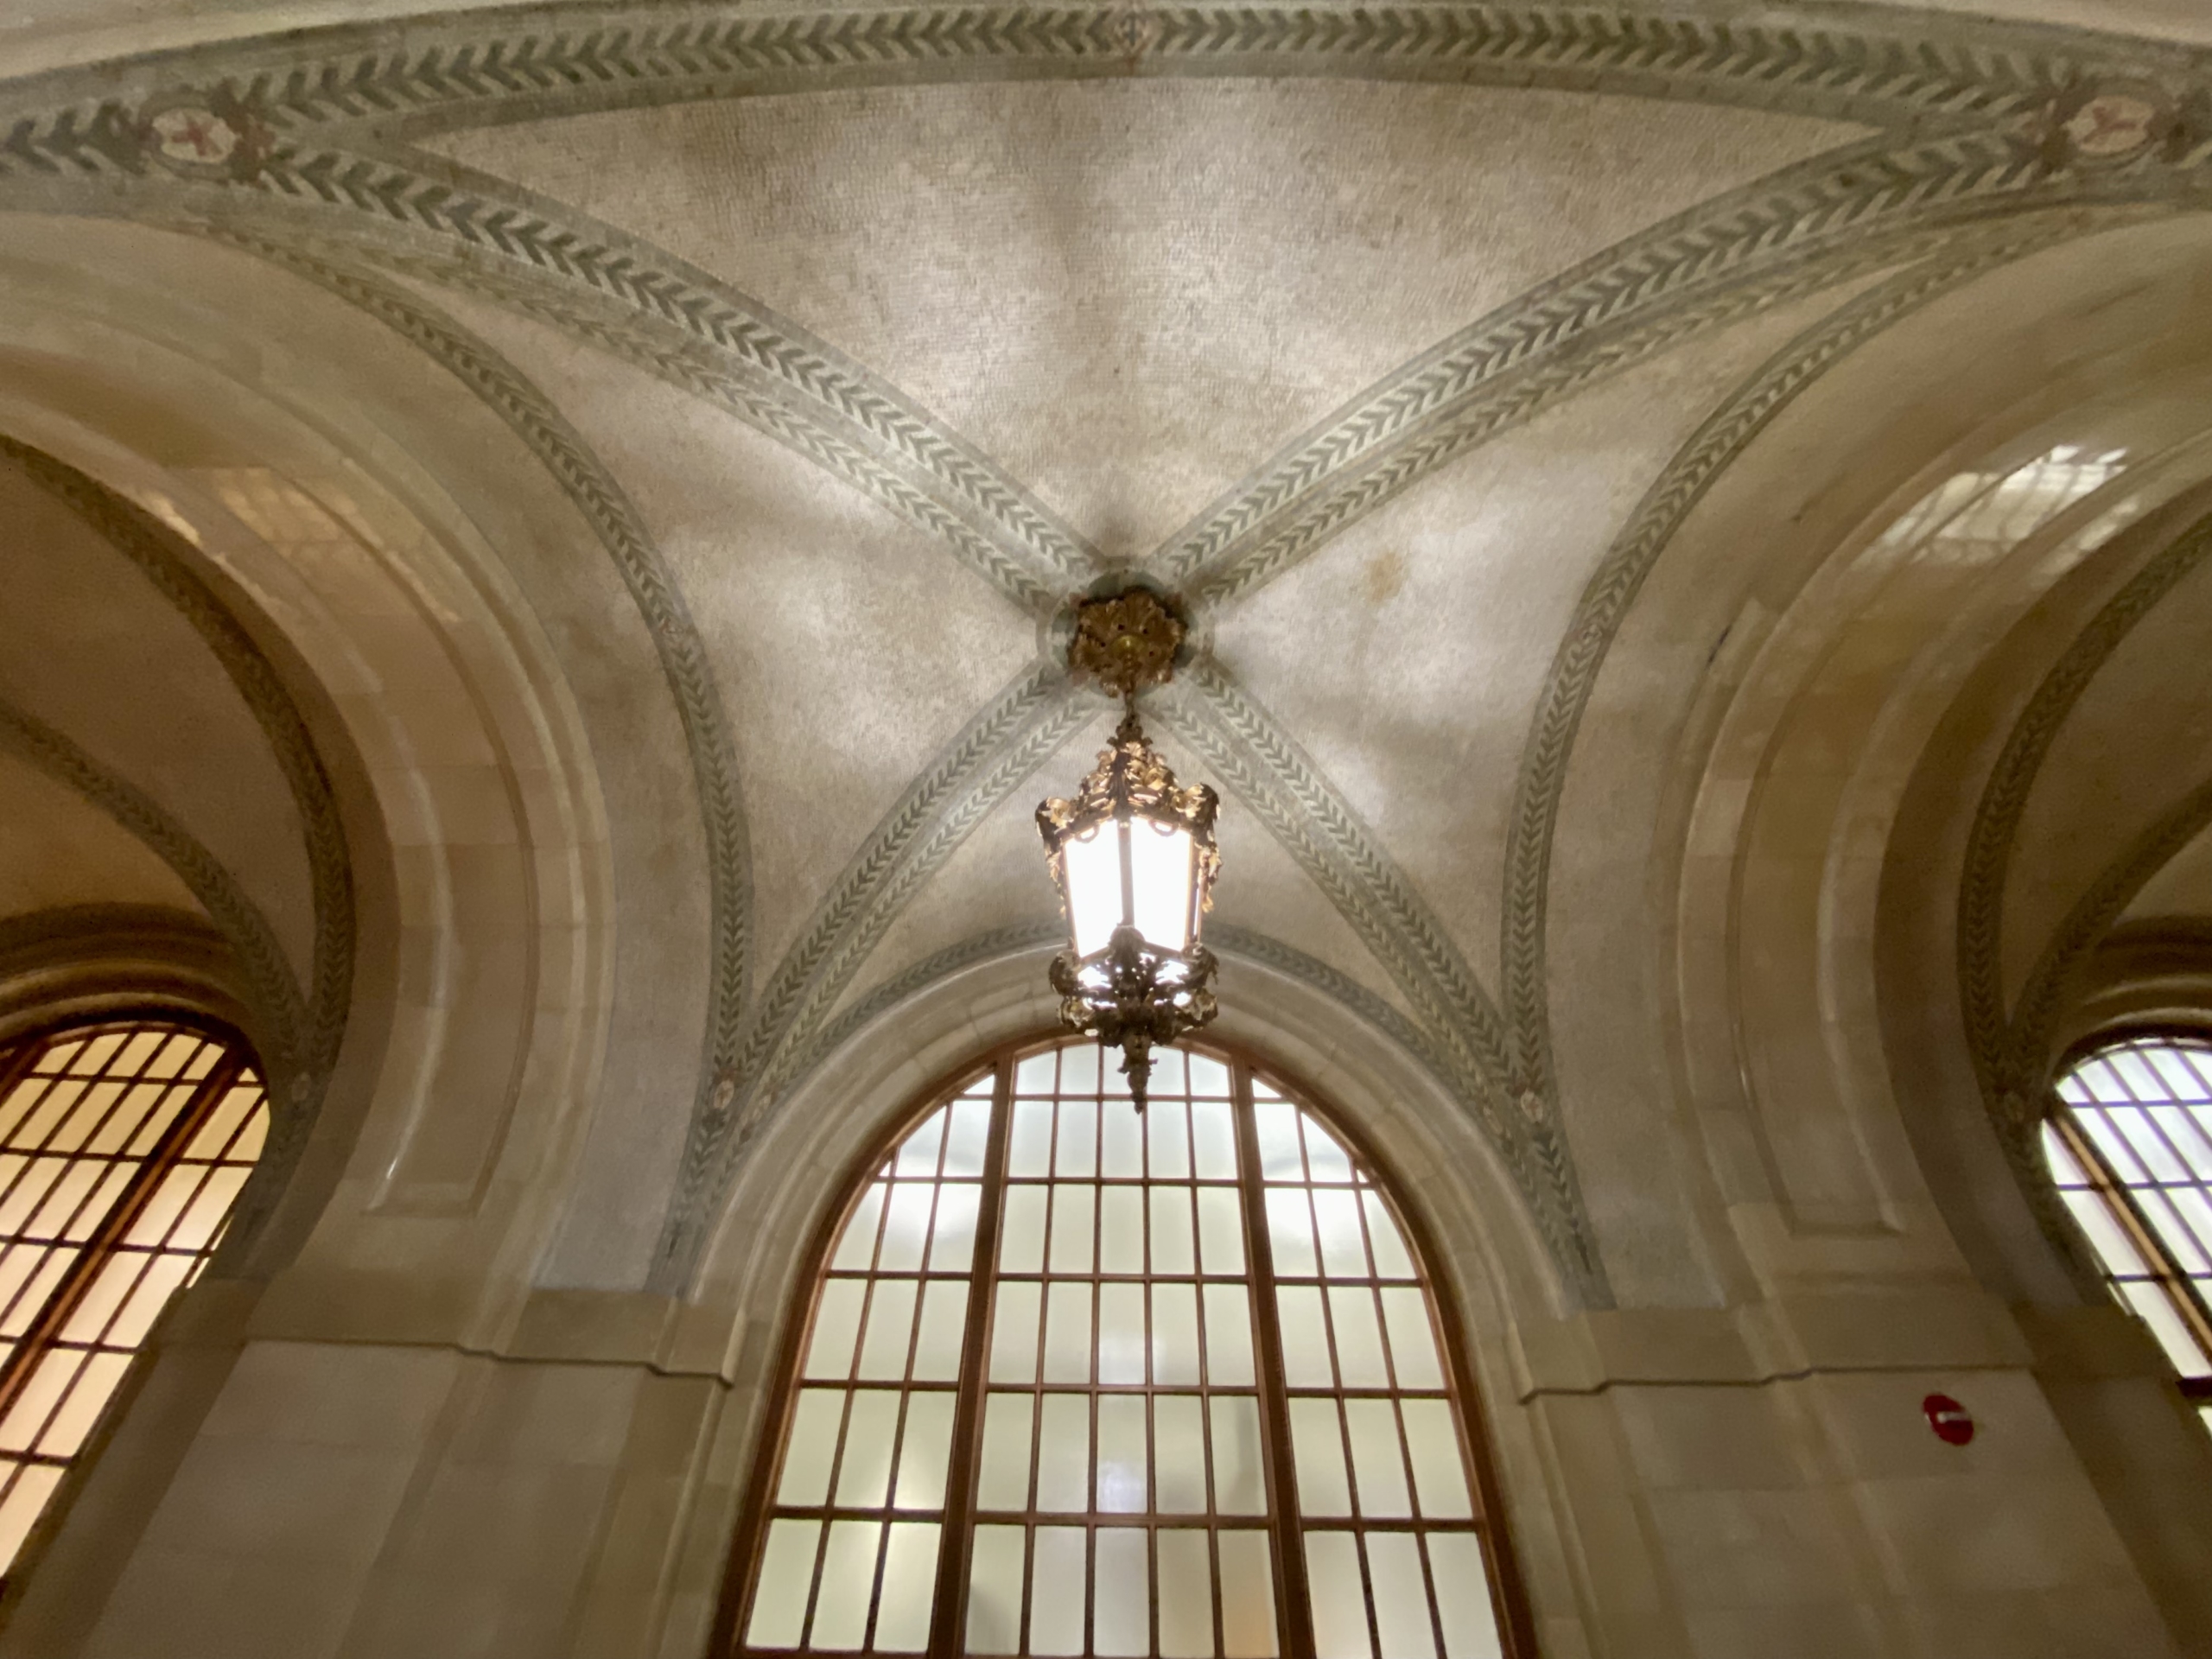 Close up on arhictectural features of the space detailing the tile work in the arched ceilings.